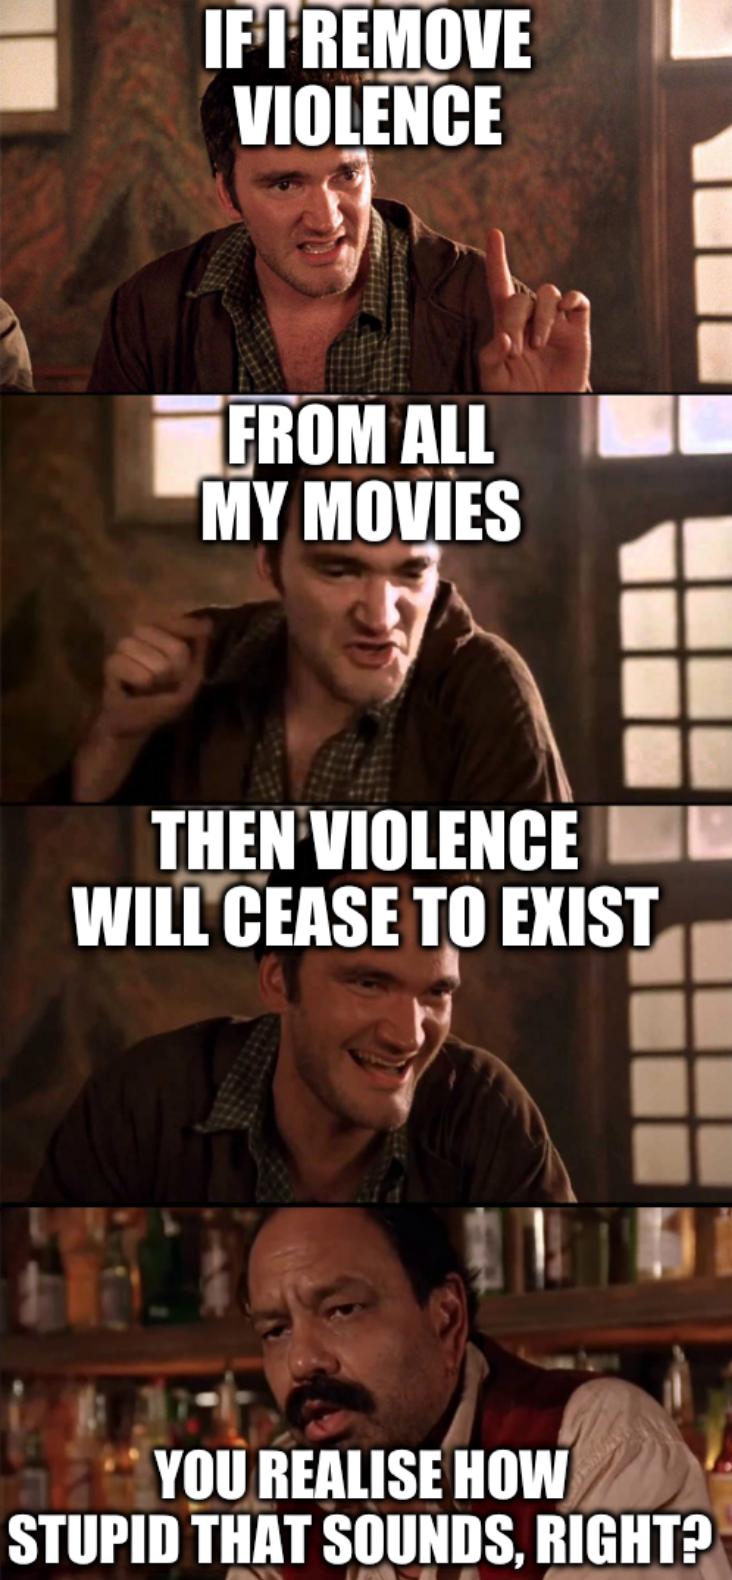 Tarantino Telling A Story: If I remove violence from all my movies then violence will cease to exist... You realise how stupid that sounds, right?